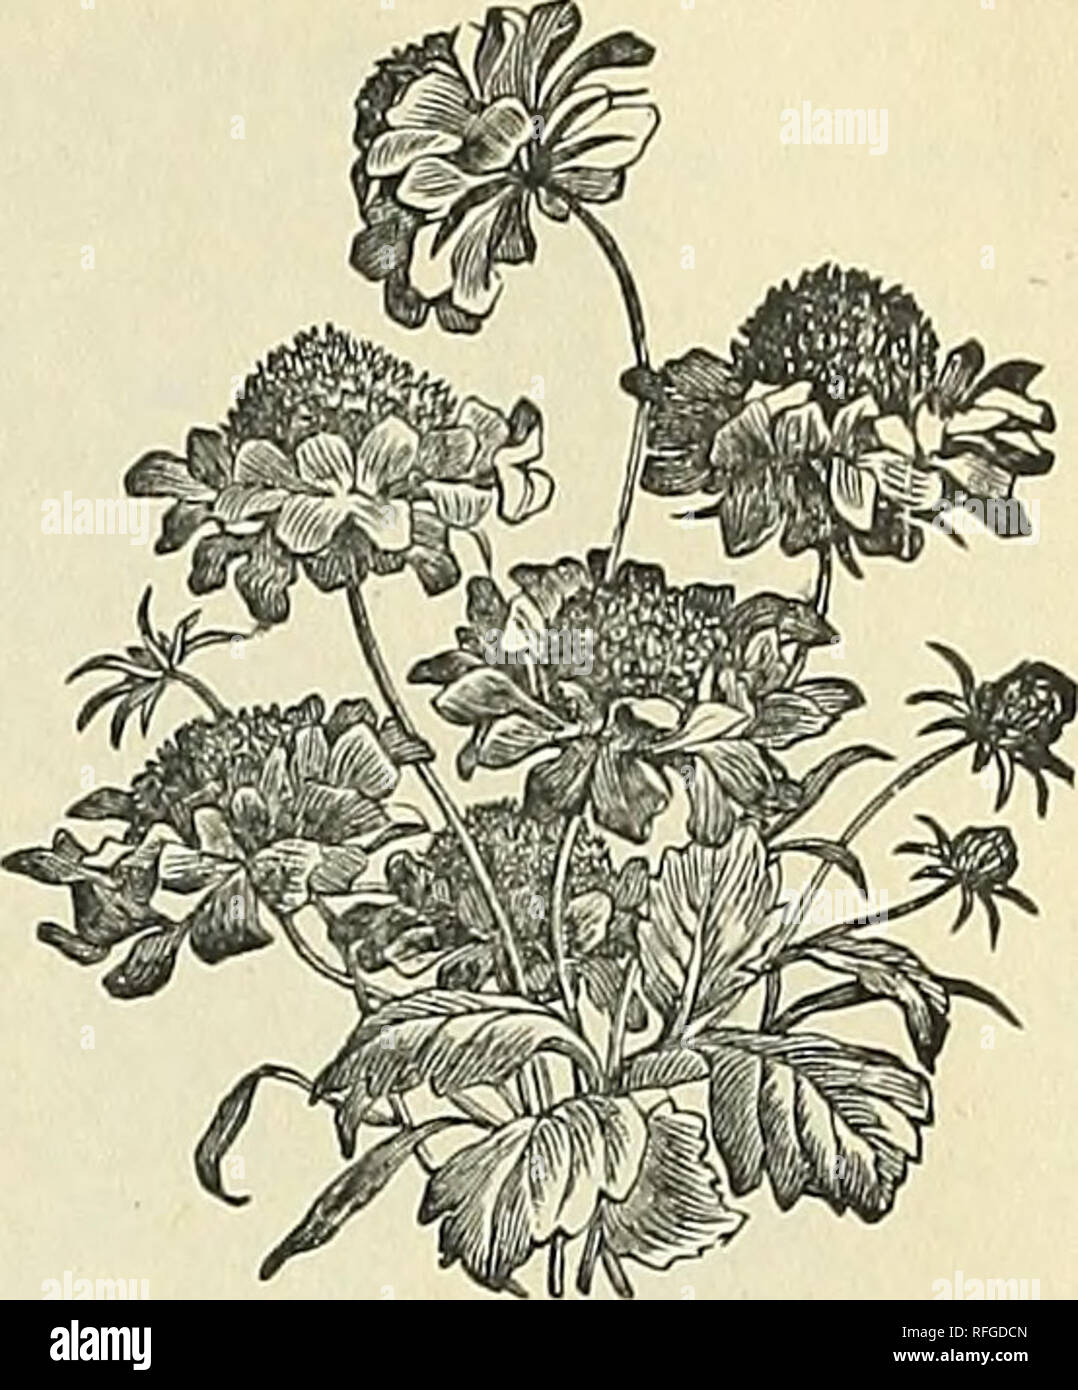 . Vegetable, flower &amp; agricultural seeds : spring 1900. Nursery stock New York (State) New York Catalogs; Vegetables Seeds Catalogs; Grasses Seeds Catalogs; Flowers Seeds Catalogs; Gardening Equipment and supplies Catalogs. SALVIA. 8ANVITALIA TROCUMBENS. PER PKT. Magnificent bedding plants of the most brilliant and effective character. Laden with gorgeous scarlet spikes, a bed of Sal- via Splendens forms a beautiful and highly attractive object. H. H. P., 2 ft. Coccinea. Scarlet, free-flowering. H. H. A 10 Patens. Rich deep blue, fragrant 20 Splendens. Bright scarlet, spikes varying from s Stock Photo